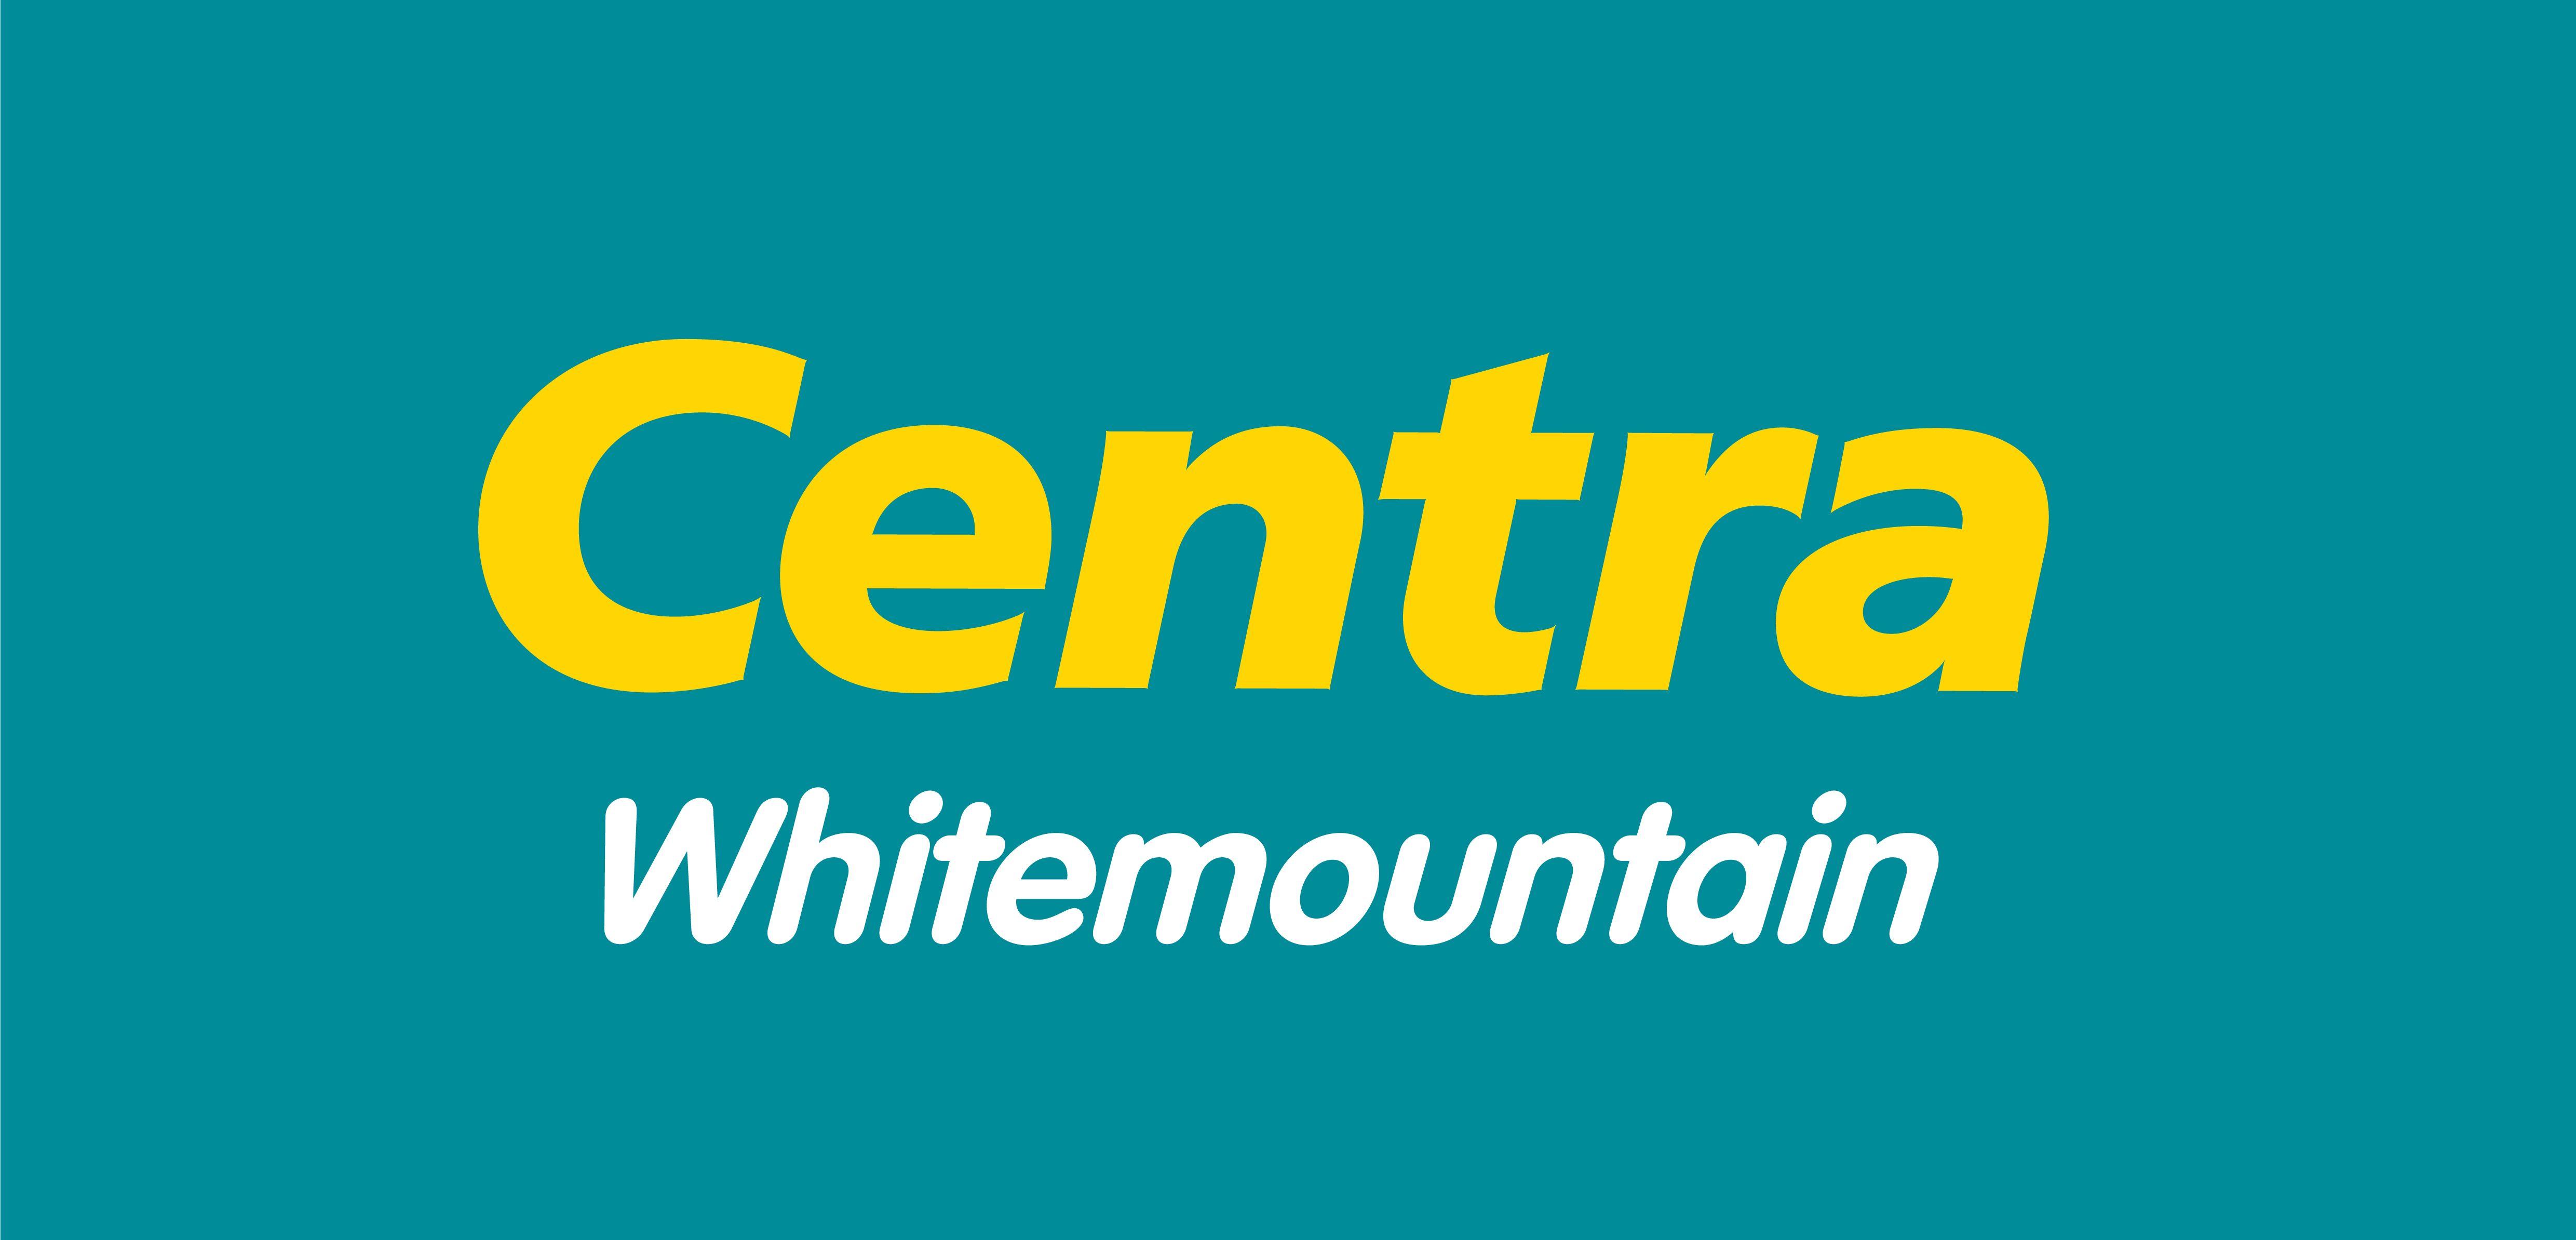 Centra Logo - Centra Logo Yellow on Green - Ulster Grand PrixUlster Grand Prix